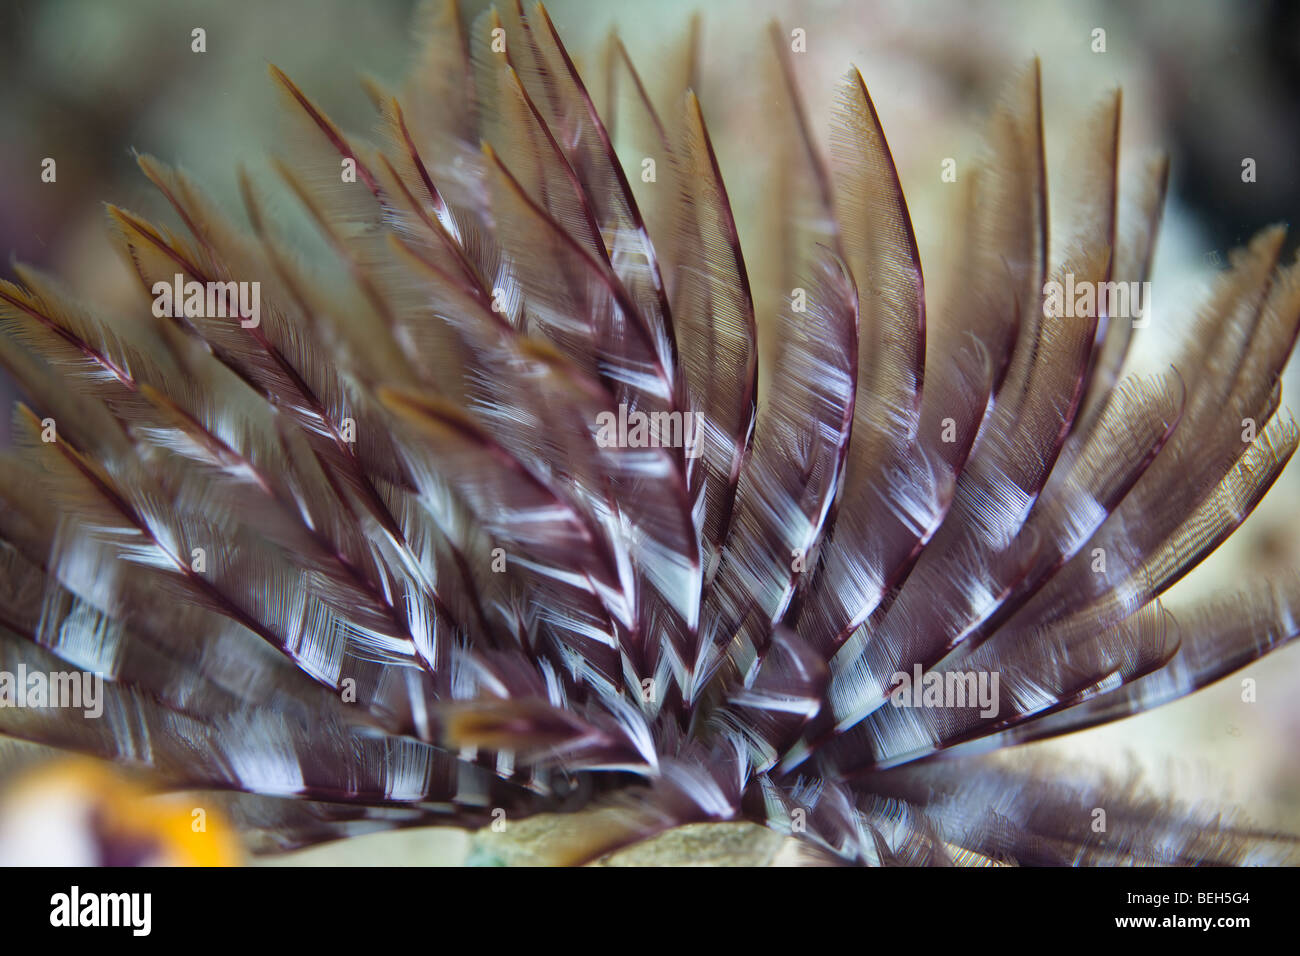 Tentacle of Featherduster Worm, Sabellastarte sp., North Sulawesi, Indonesia Stock Photo